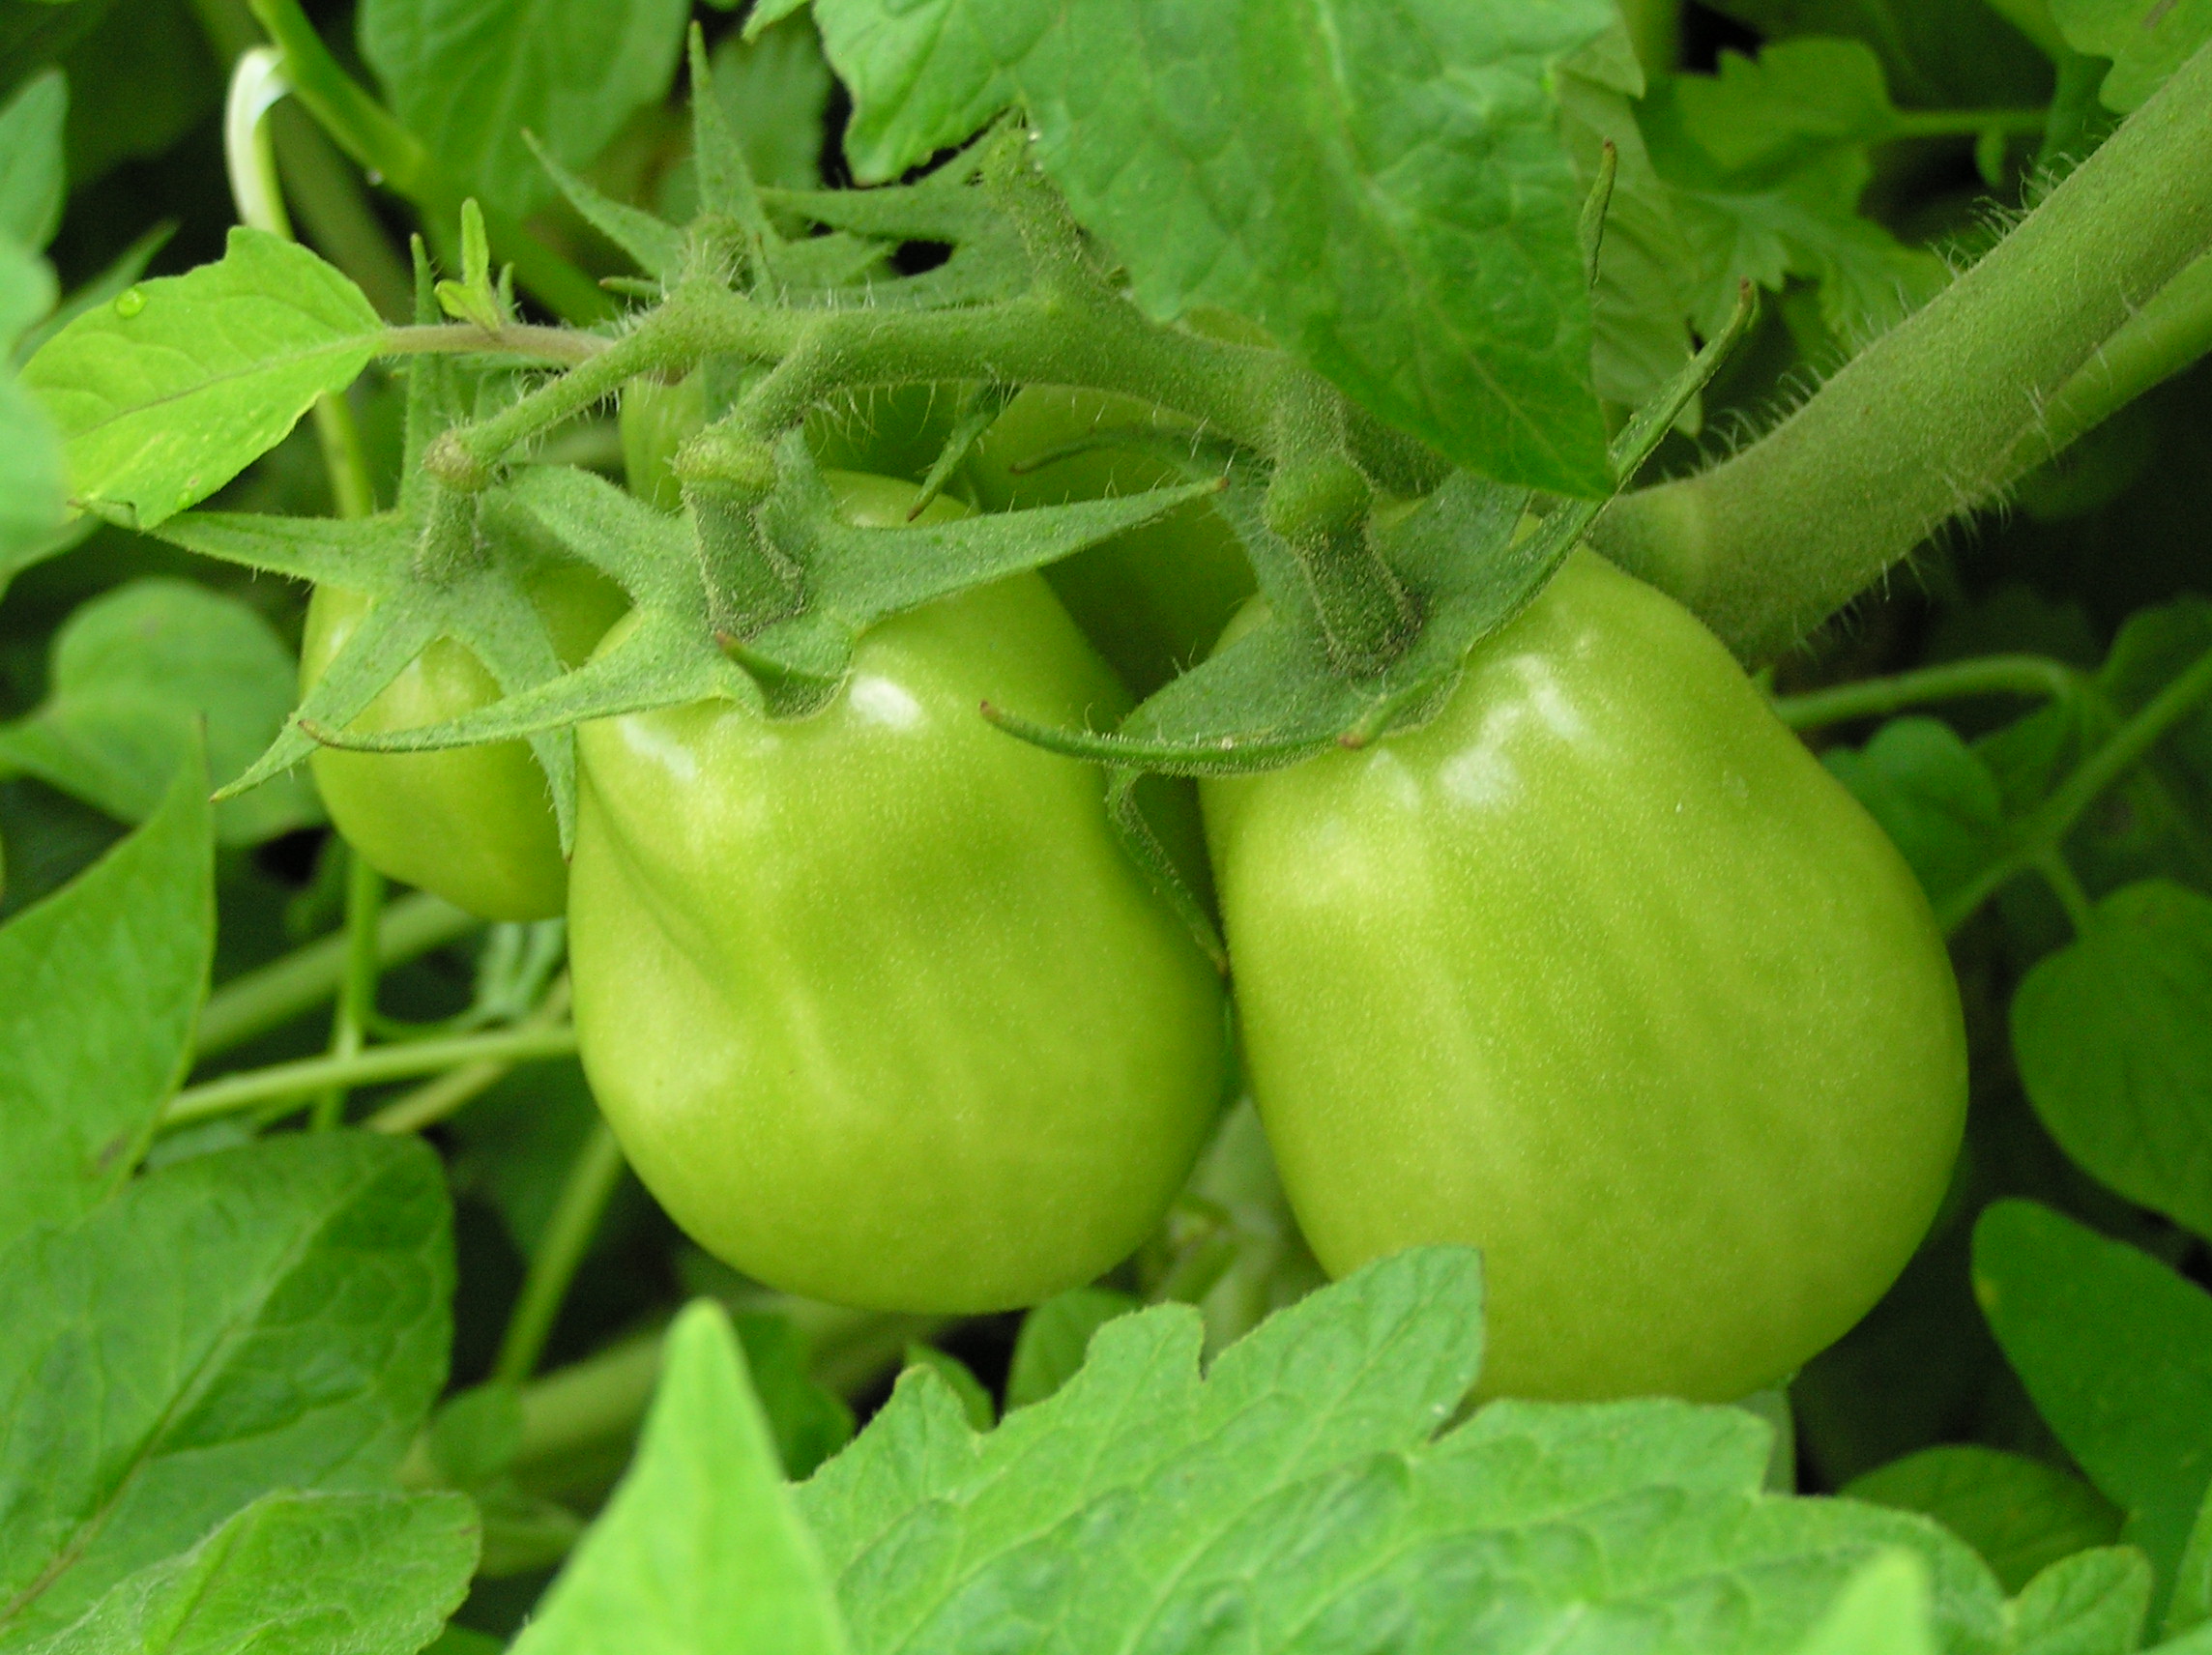 Tomato caterpillars can be controlled using organic methods.